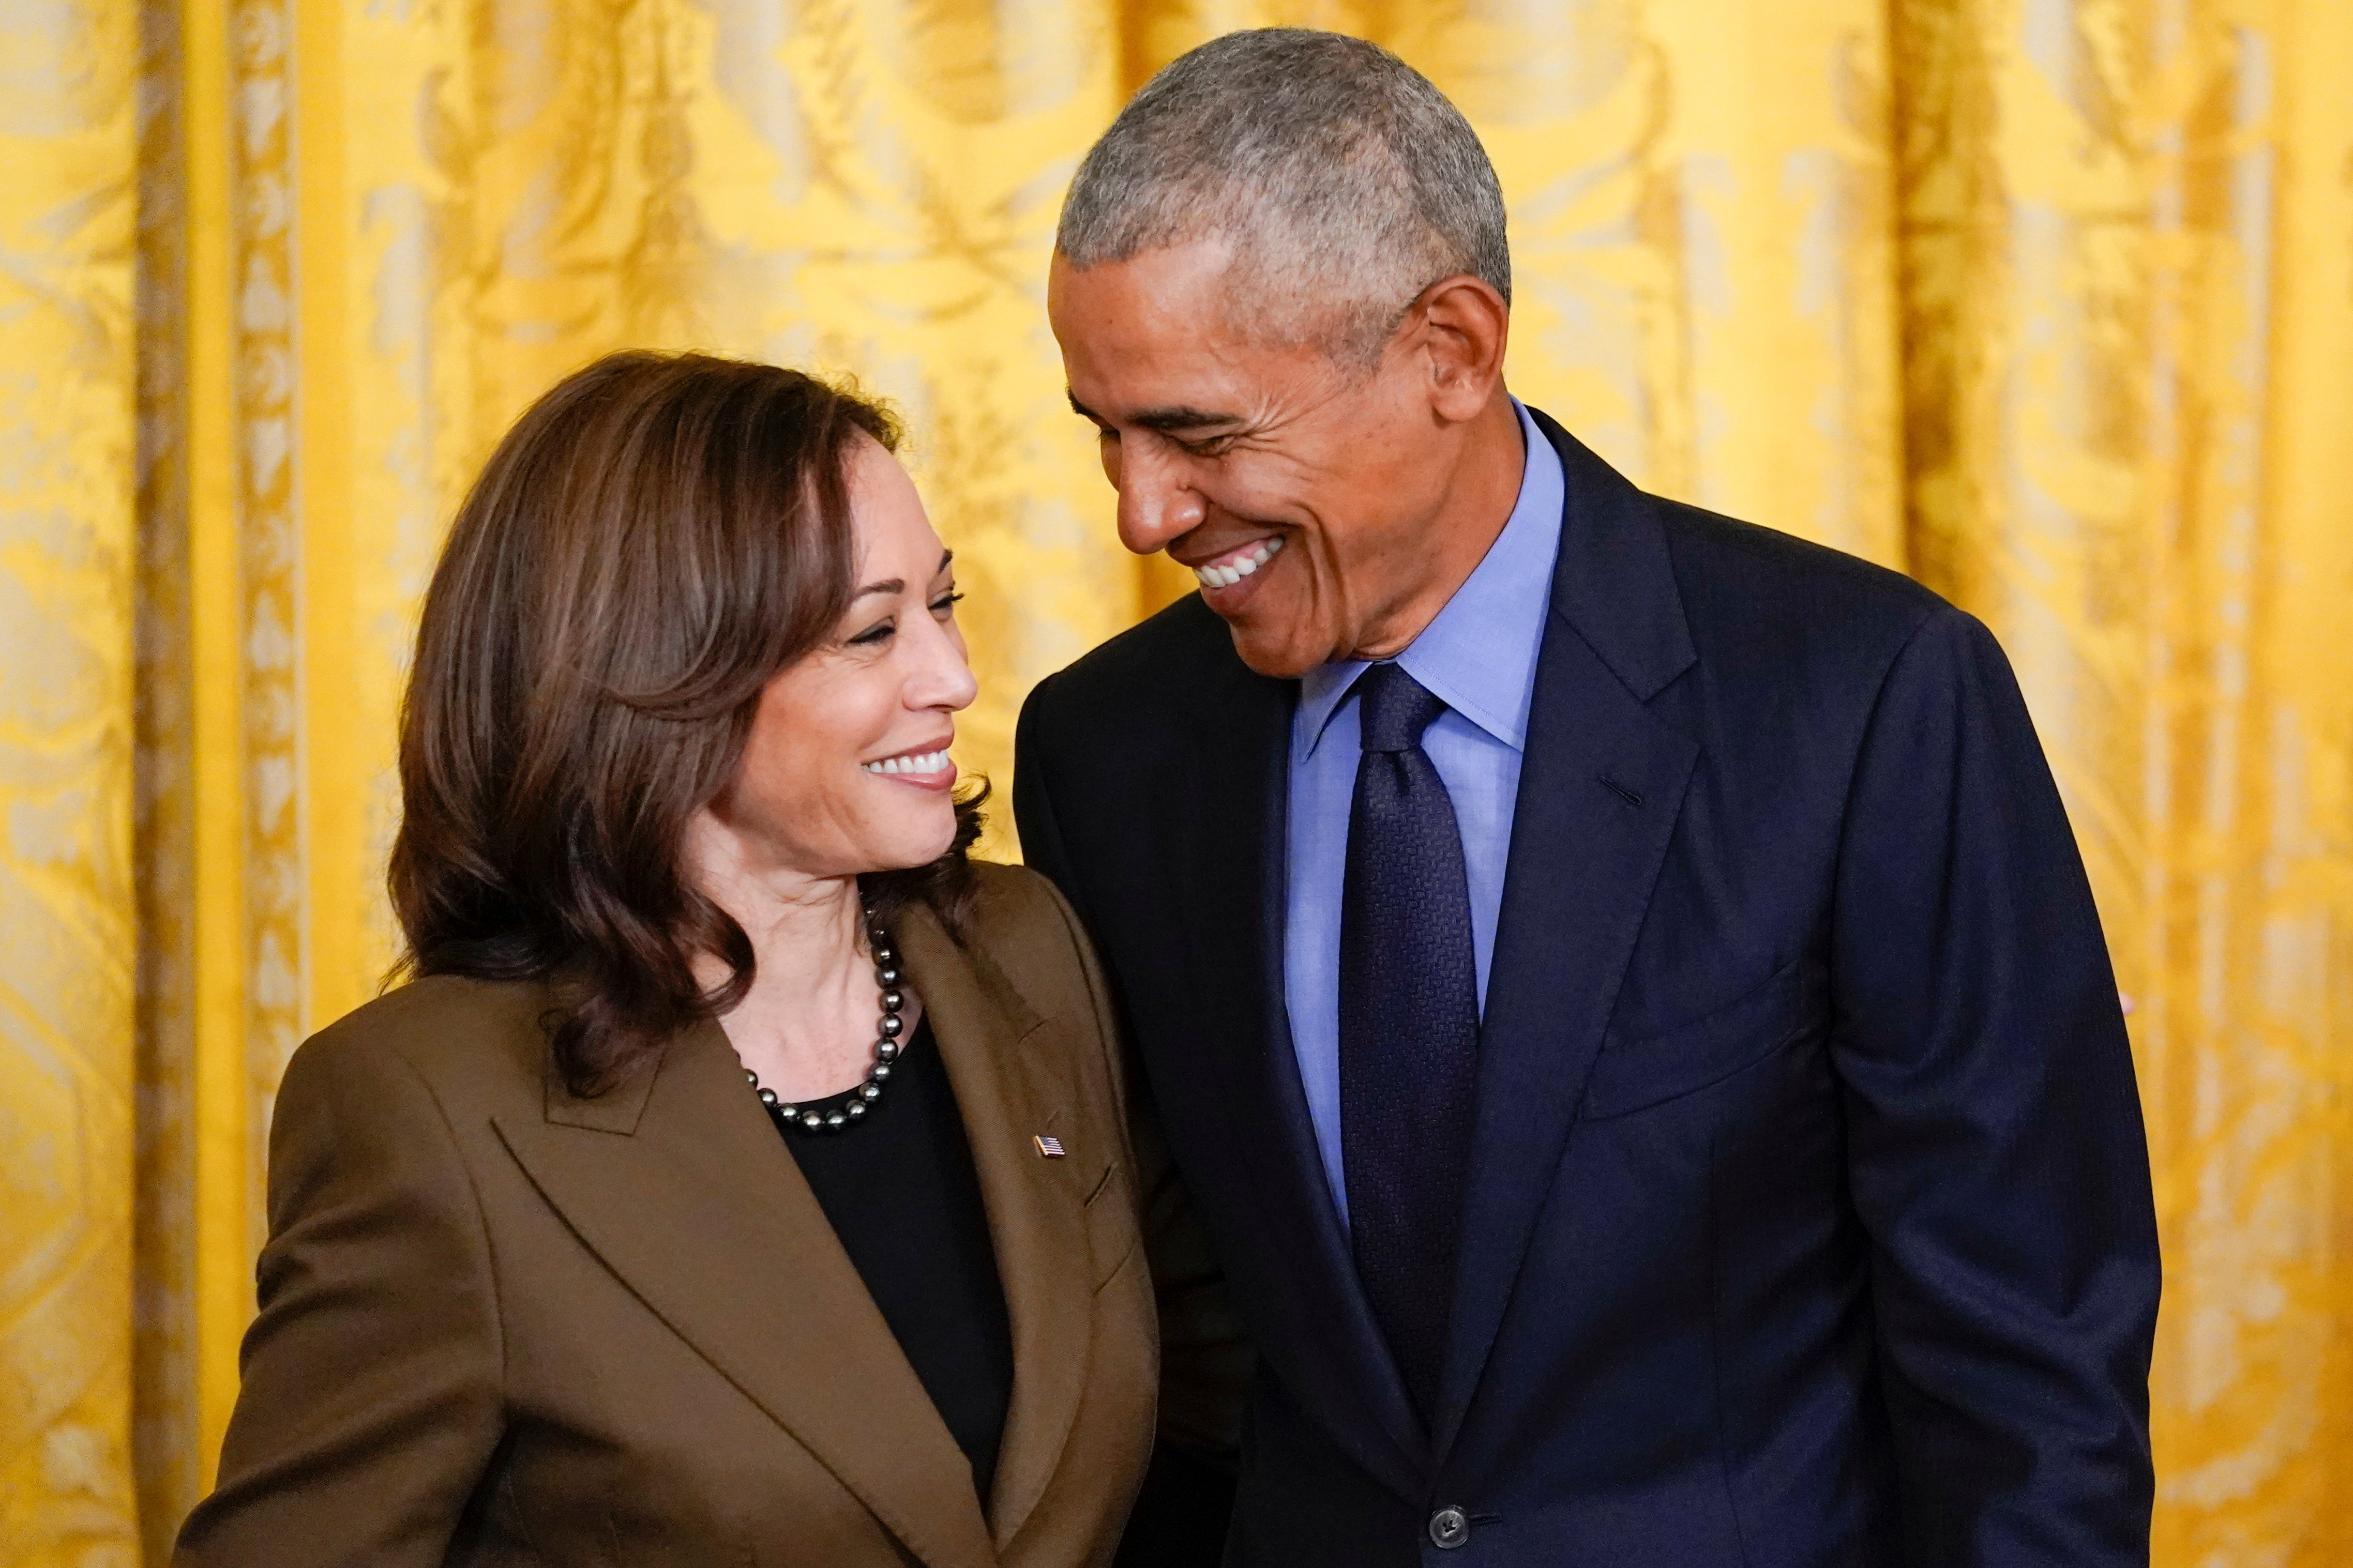 FILE - Former President Barack Obama talks with Vice President Kamala Harris during an event about the Affordable Care Act, in the East Room of the White House in Washington, April 5, 2022. Former President Barack Obama and former first lady Michelle Obama have endorsed Kamala Harris in her White House bid, giving the vice president the expected but still crucial backing of the nation’s two most popular Democrats. (AP Photo/Carolyn Kaster, File)